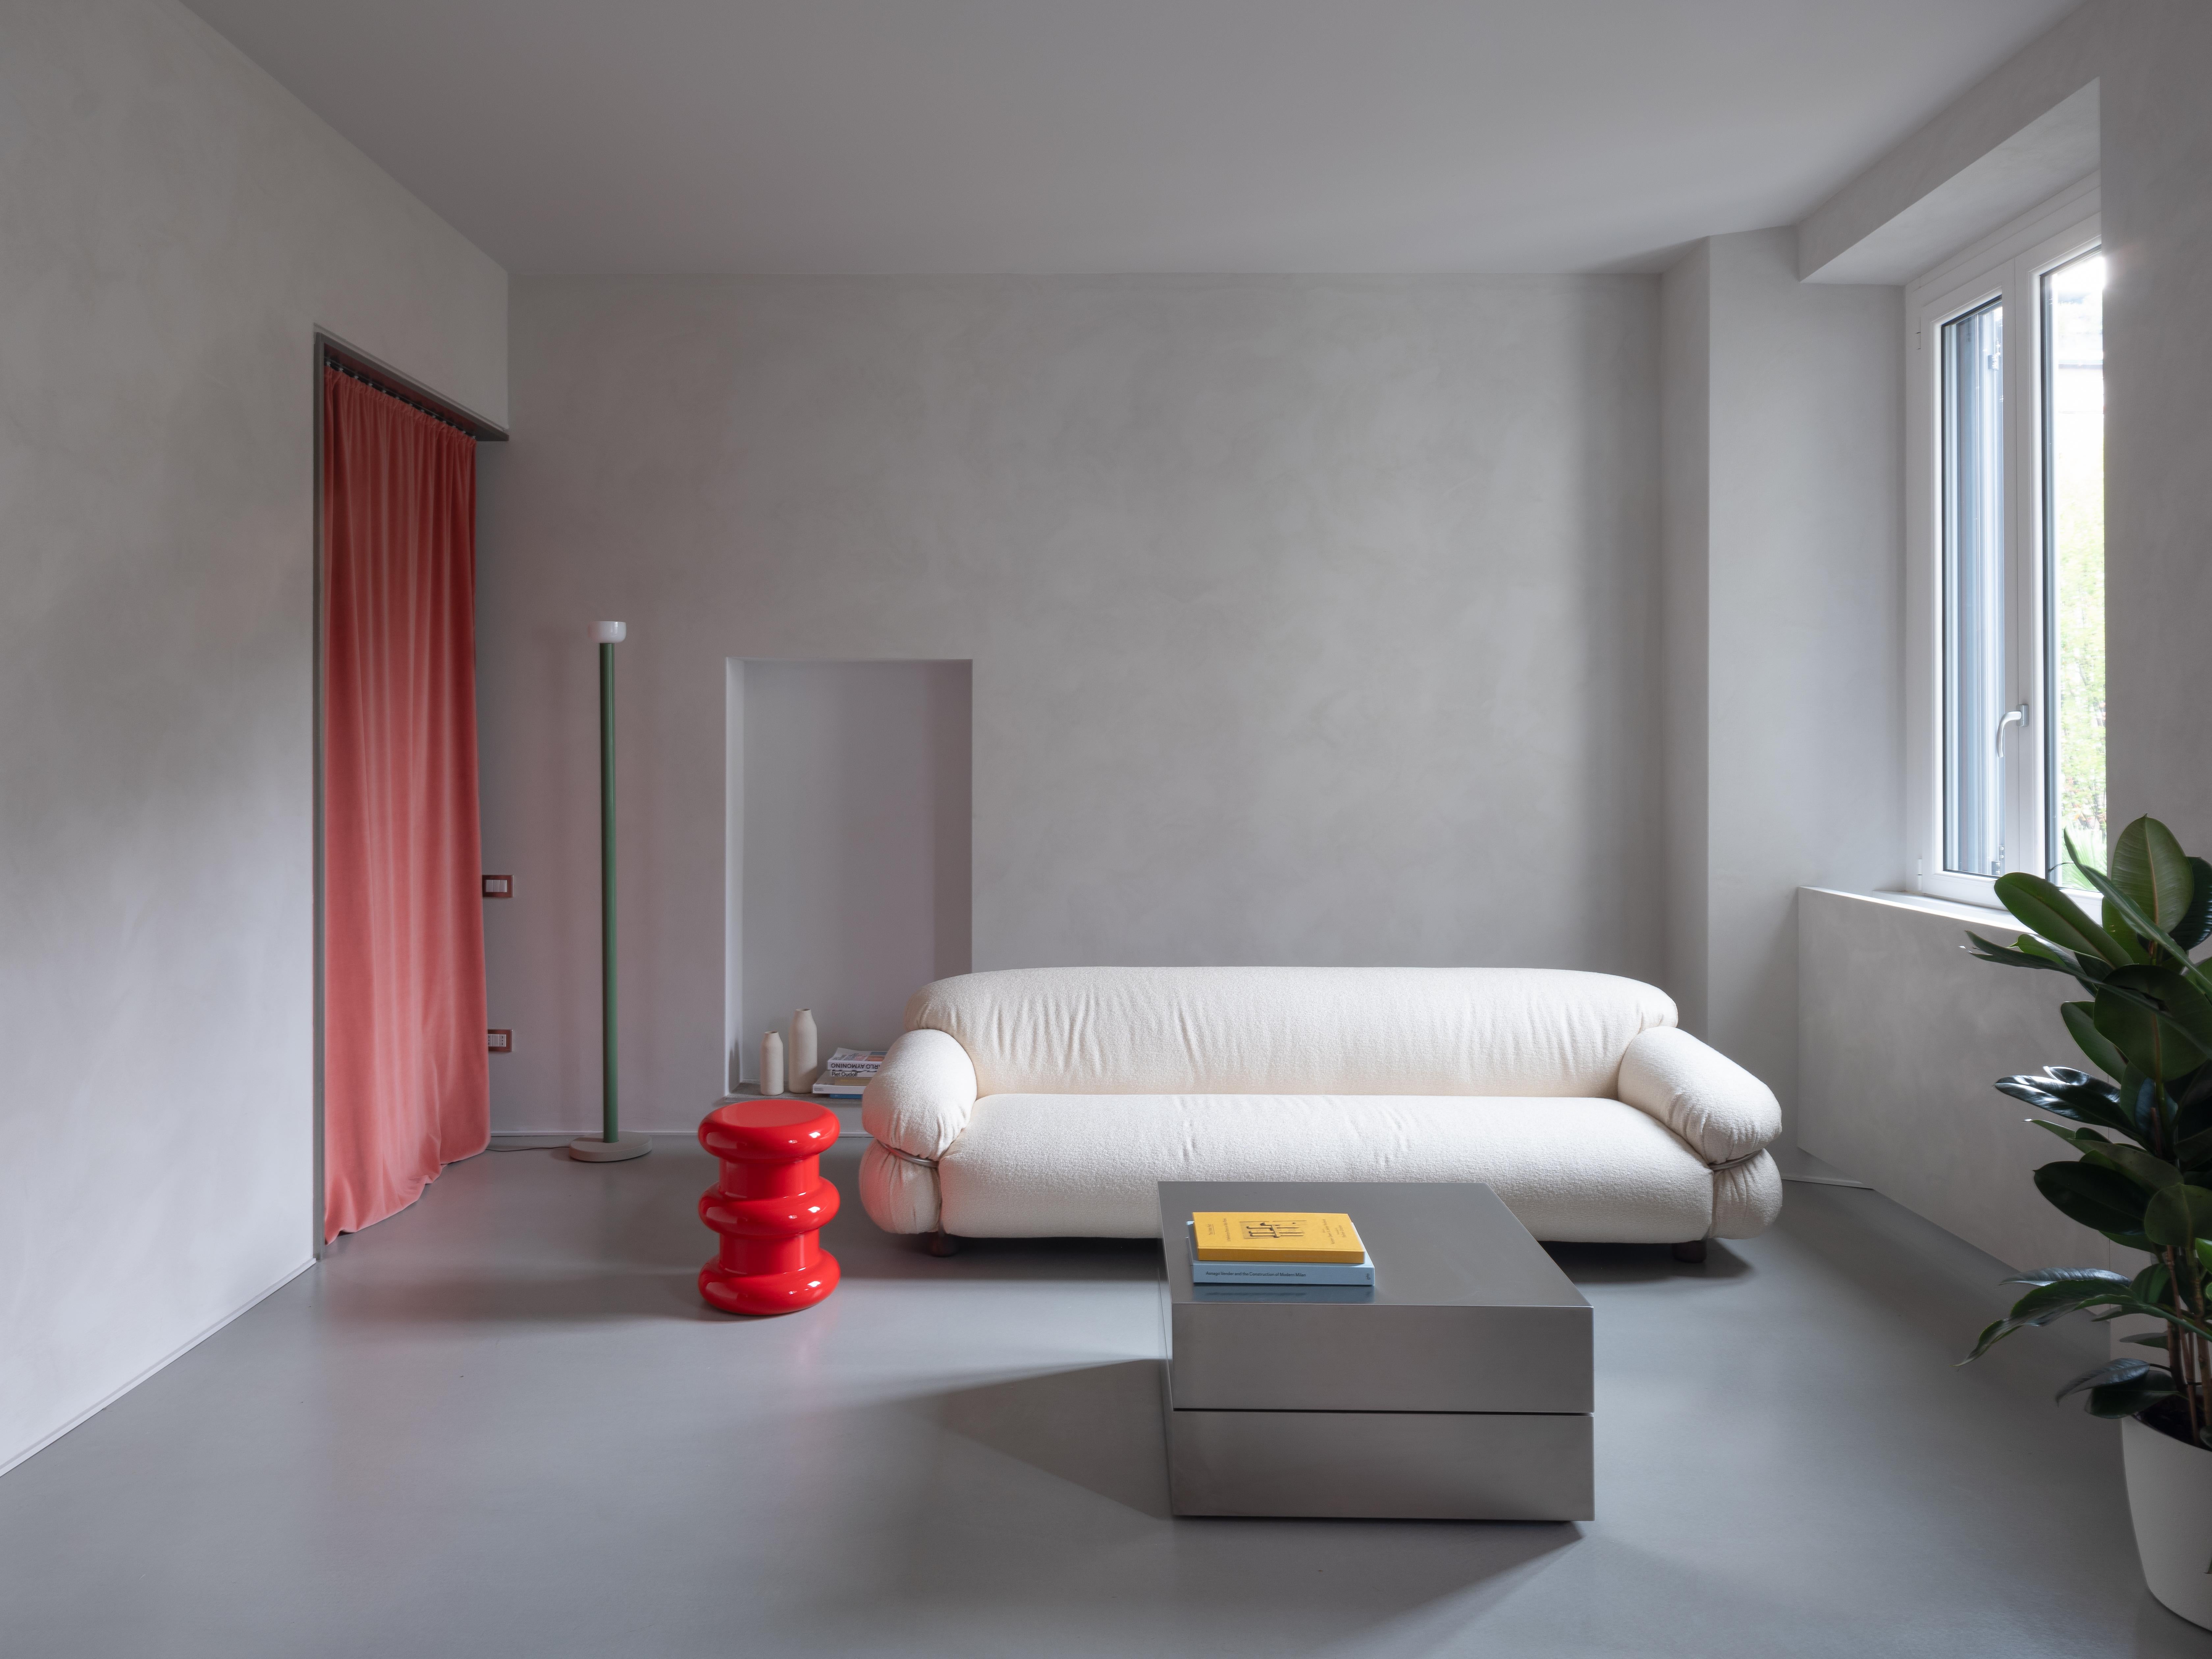 This dreamy journey begins with SOGNO at its first stage: a square, 73x73, a stainless steel casket, a pure form that shines in the living room. In the second position, Sogno begins to unveil its secret. Rotating 90 degrees, it reveals its most